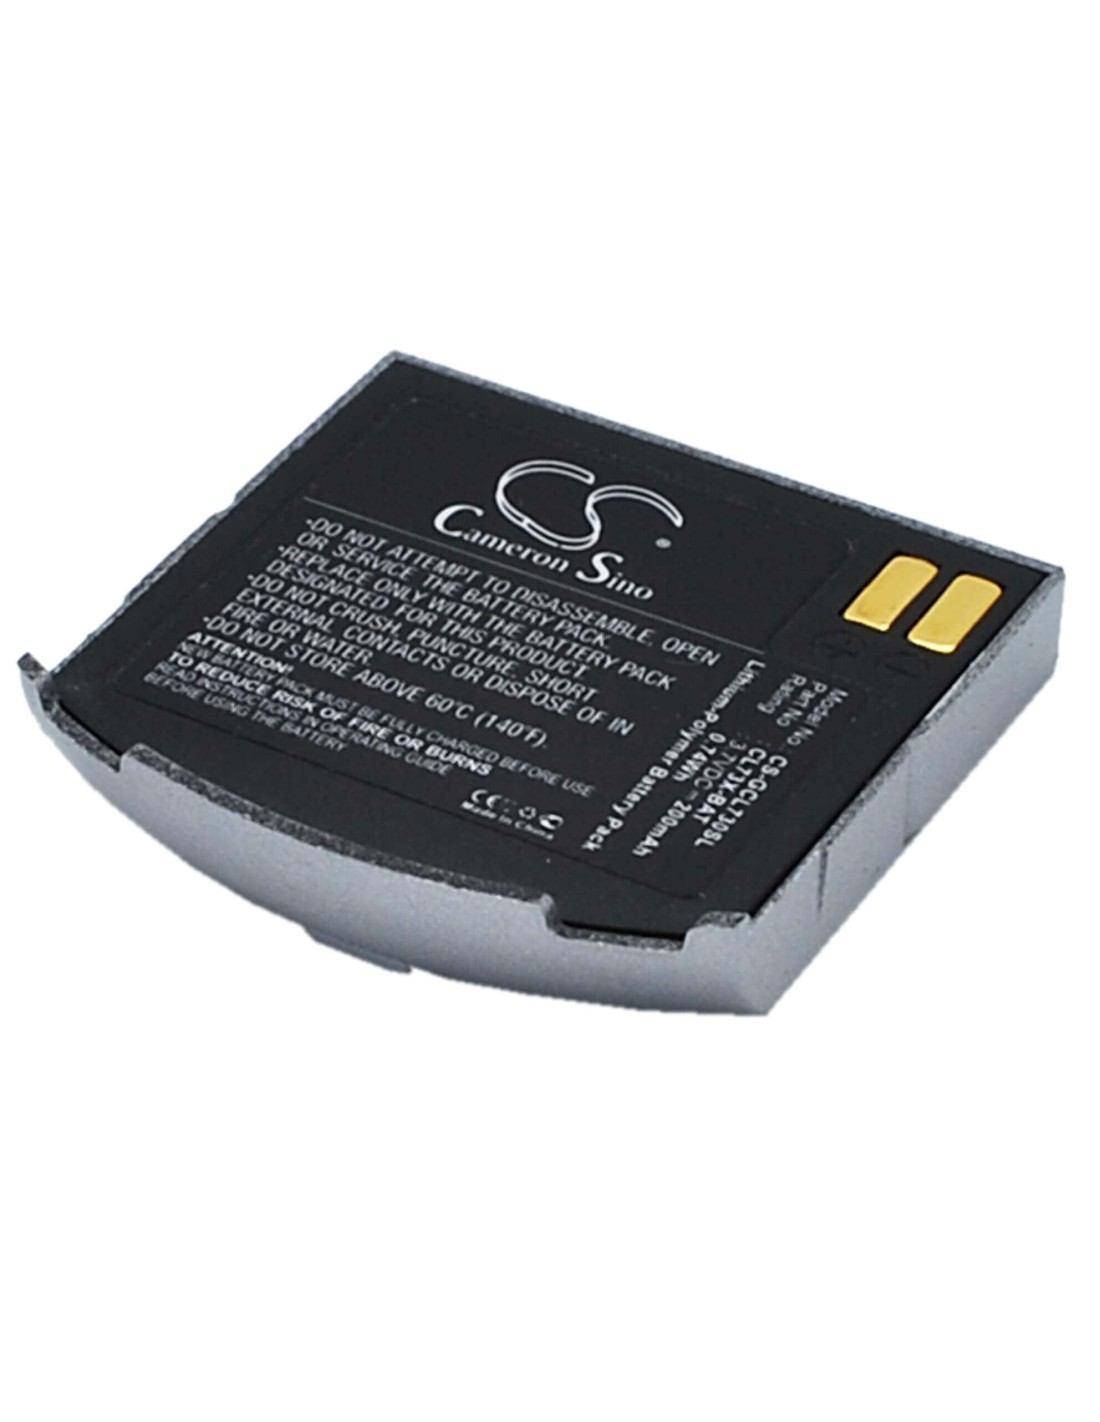 Battery for Geemarc Cl7300, Cl7300ad 3.7V, 200mAh - 0.74Wh